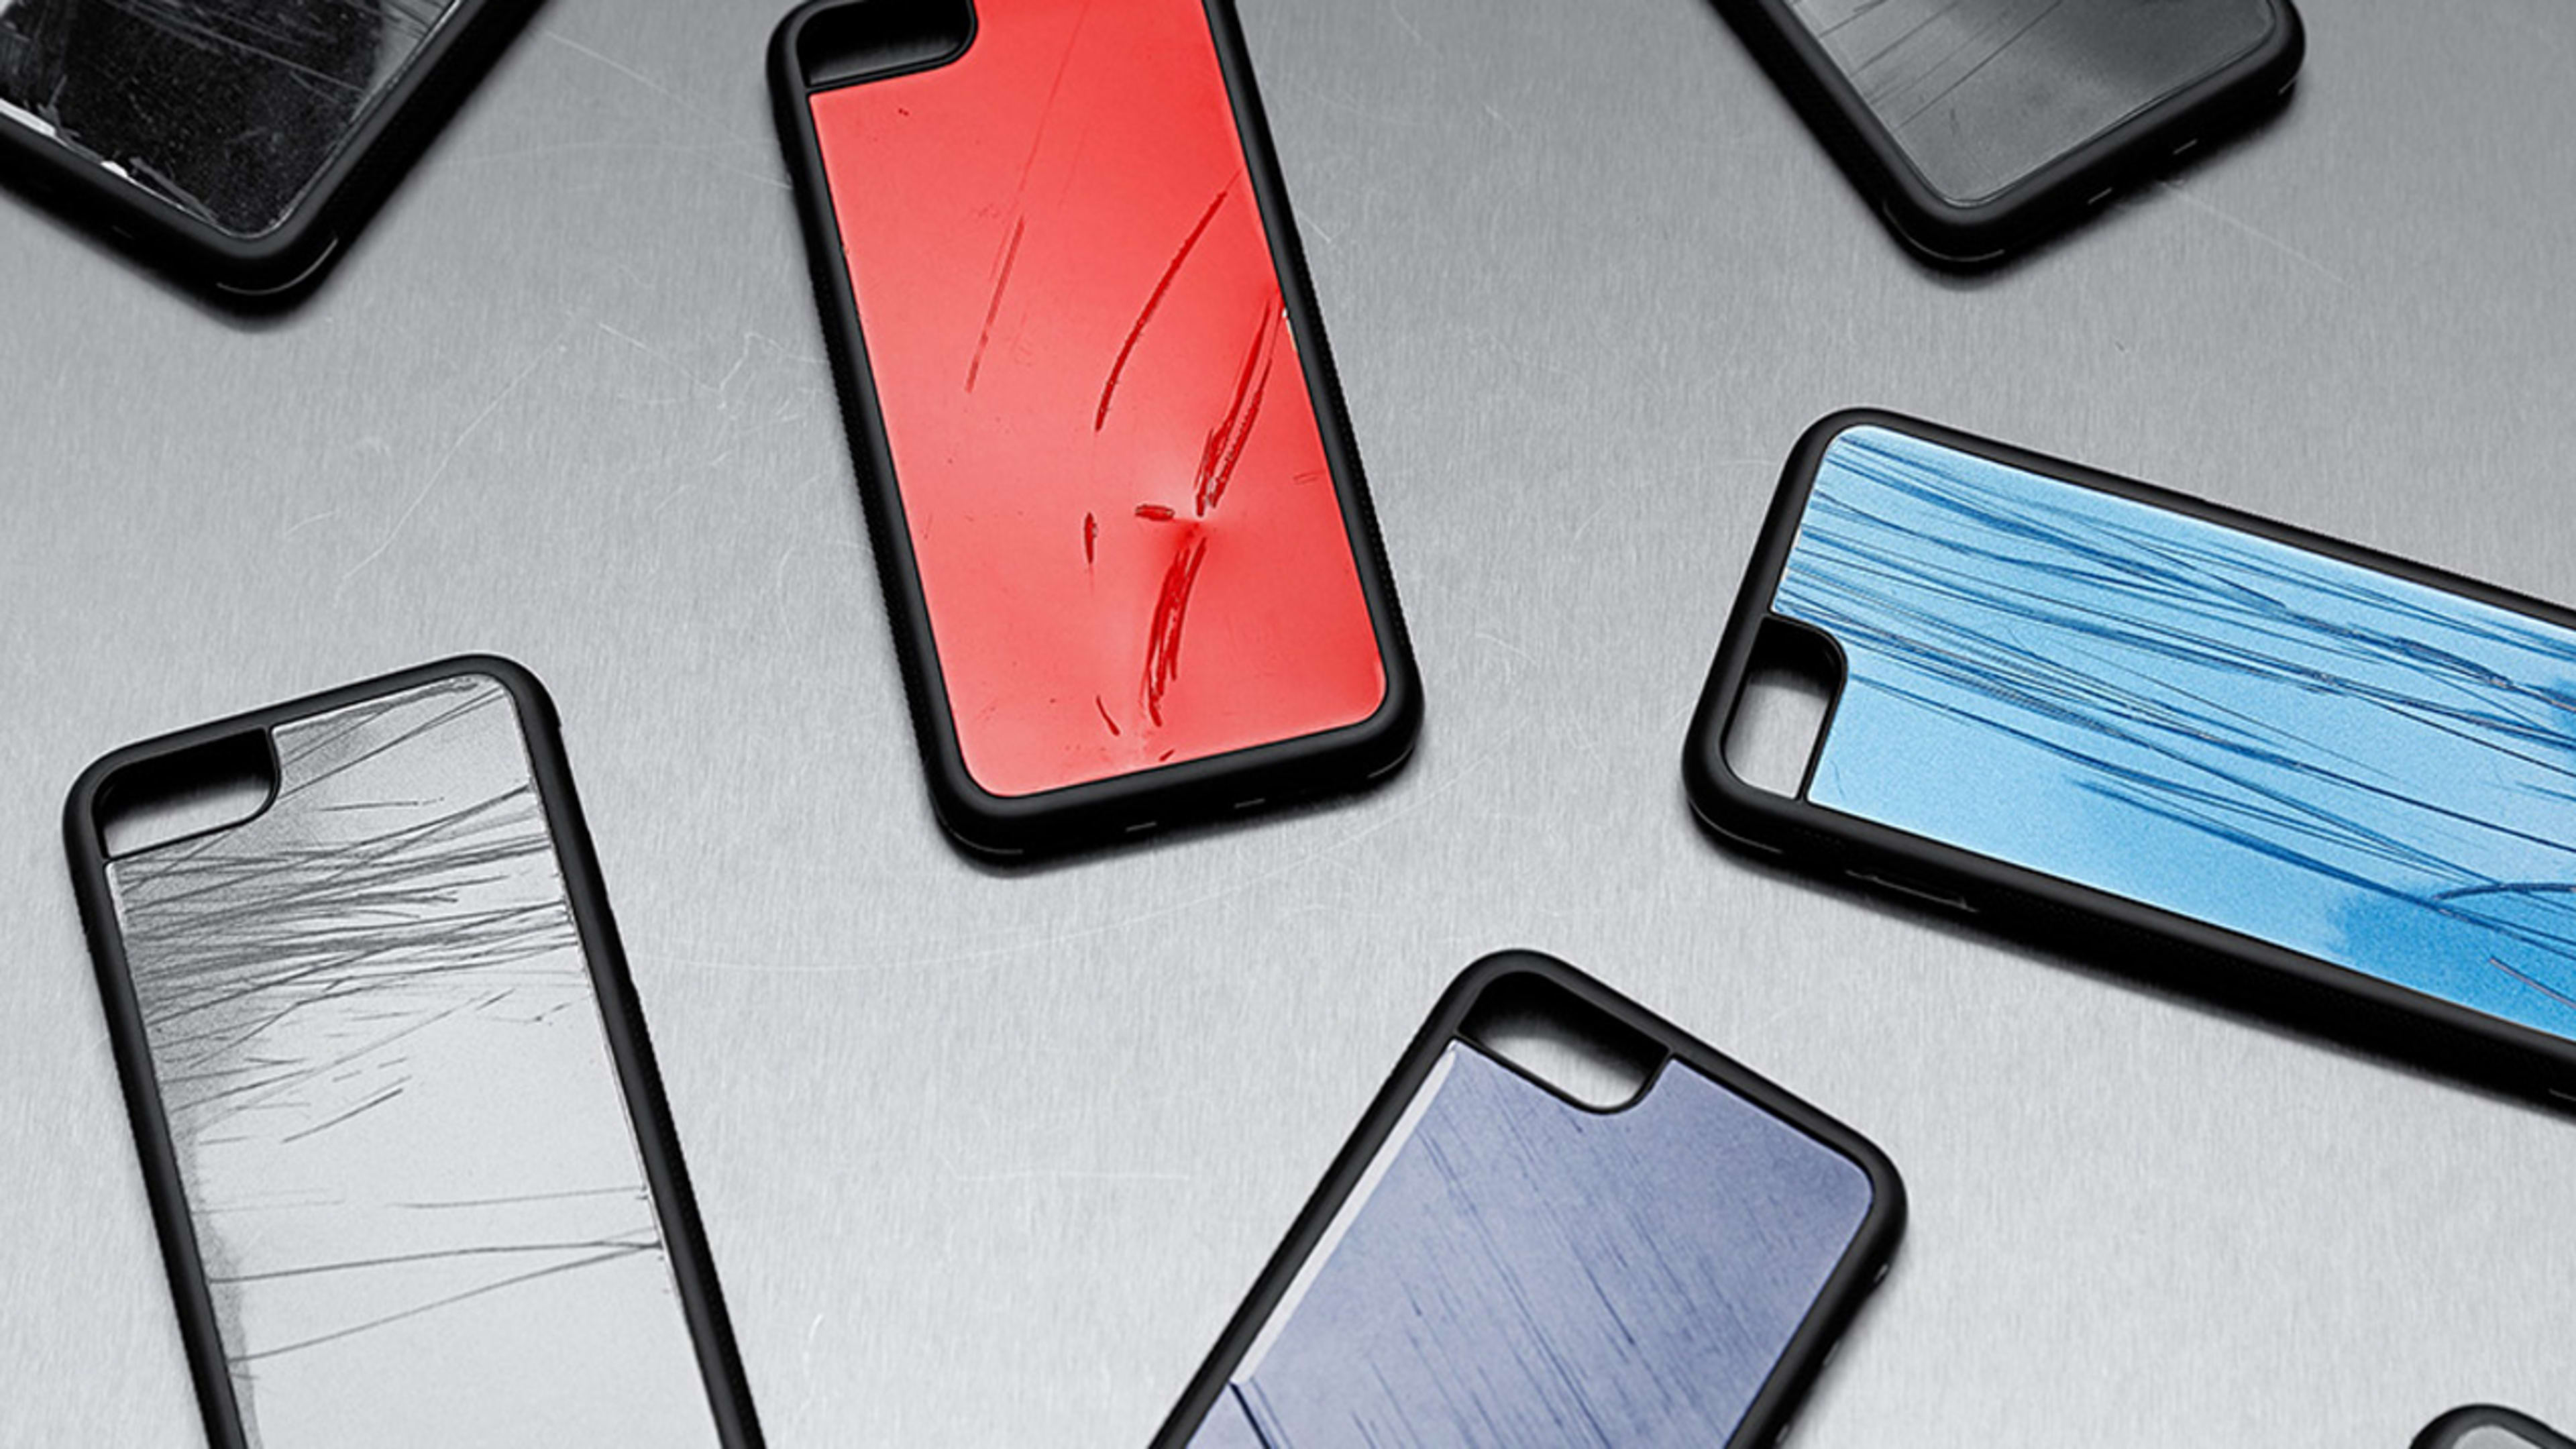 Would a phone case made of mangled car metal make you stop texting and driving?